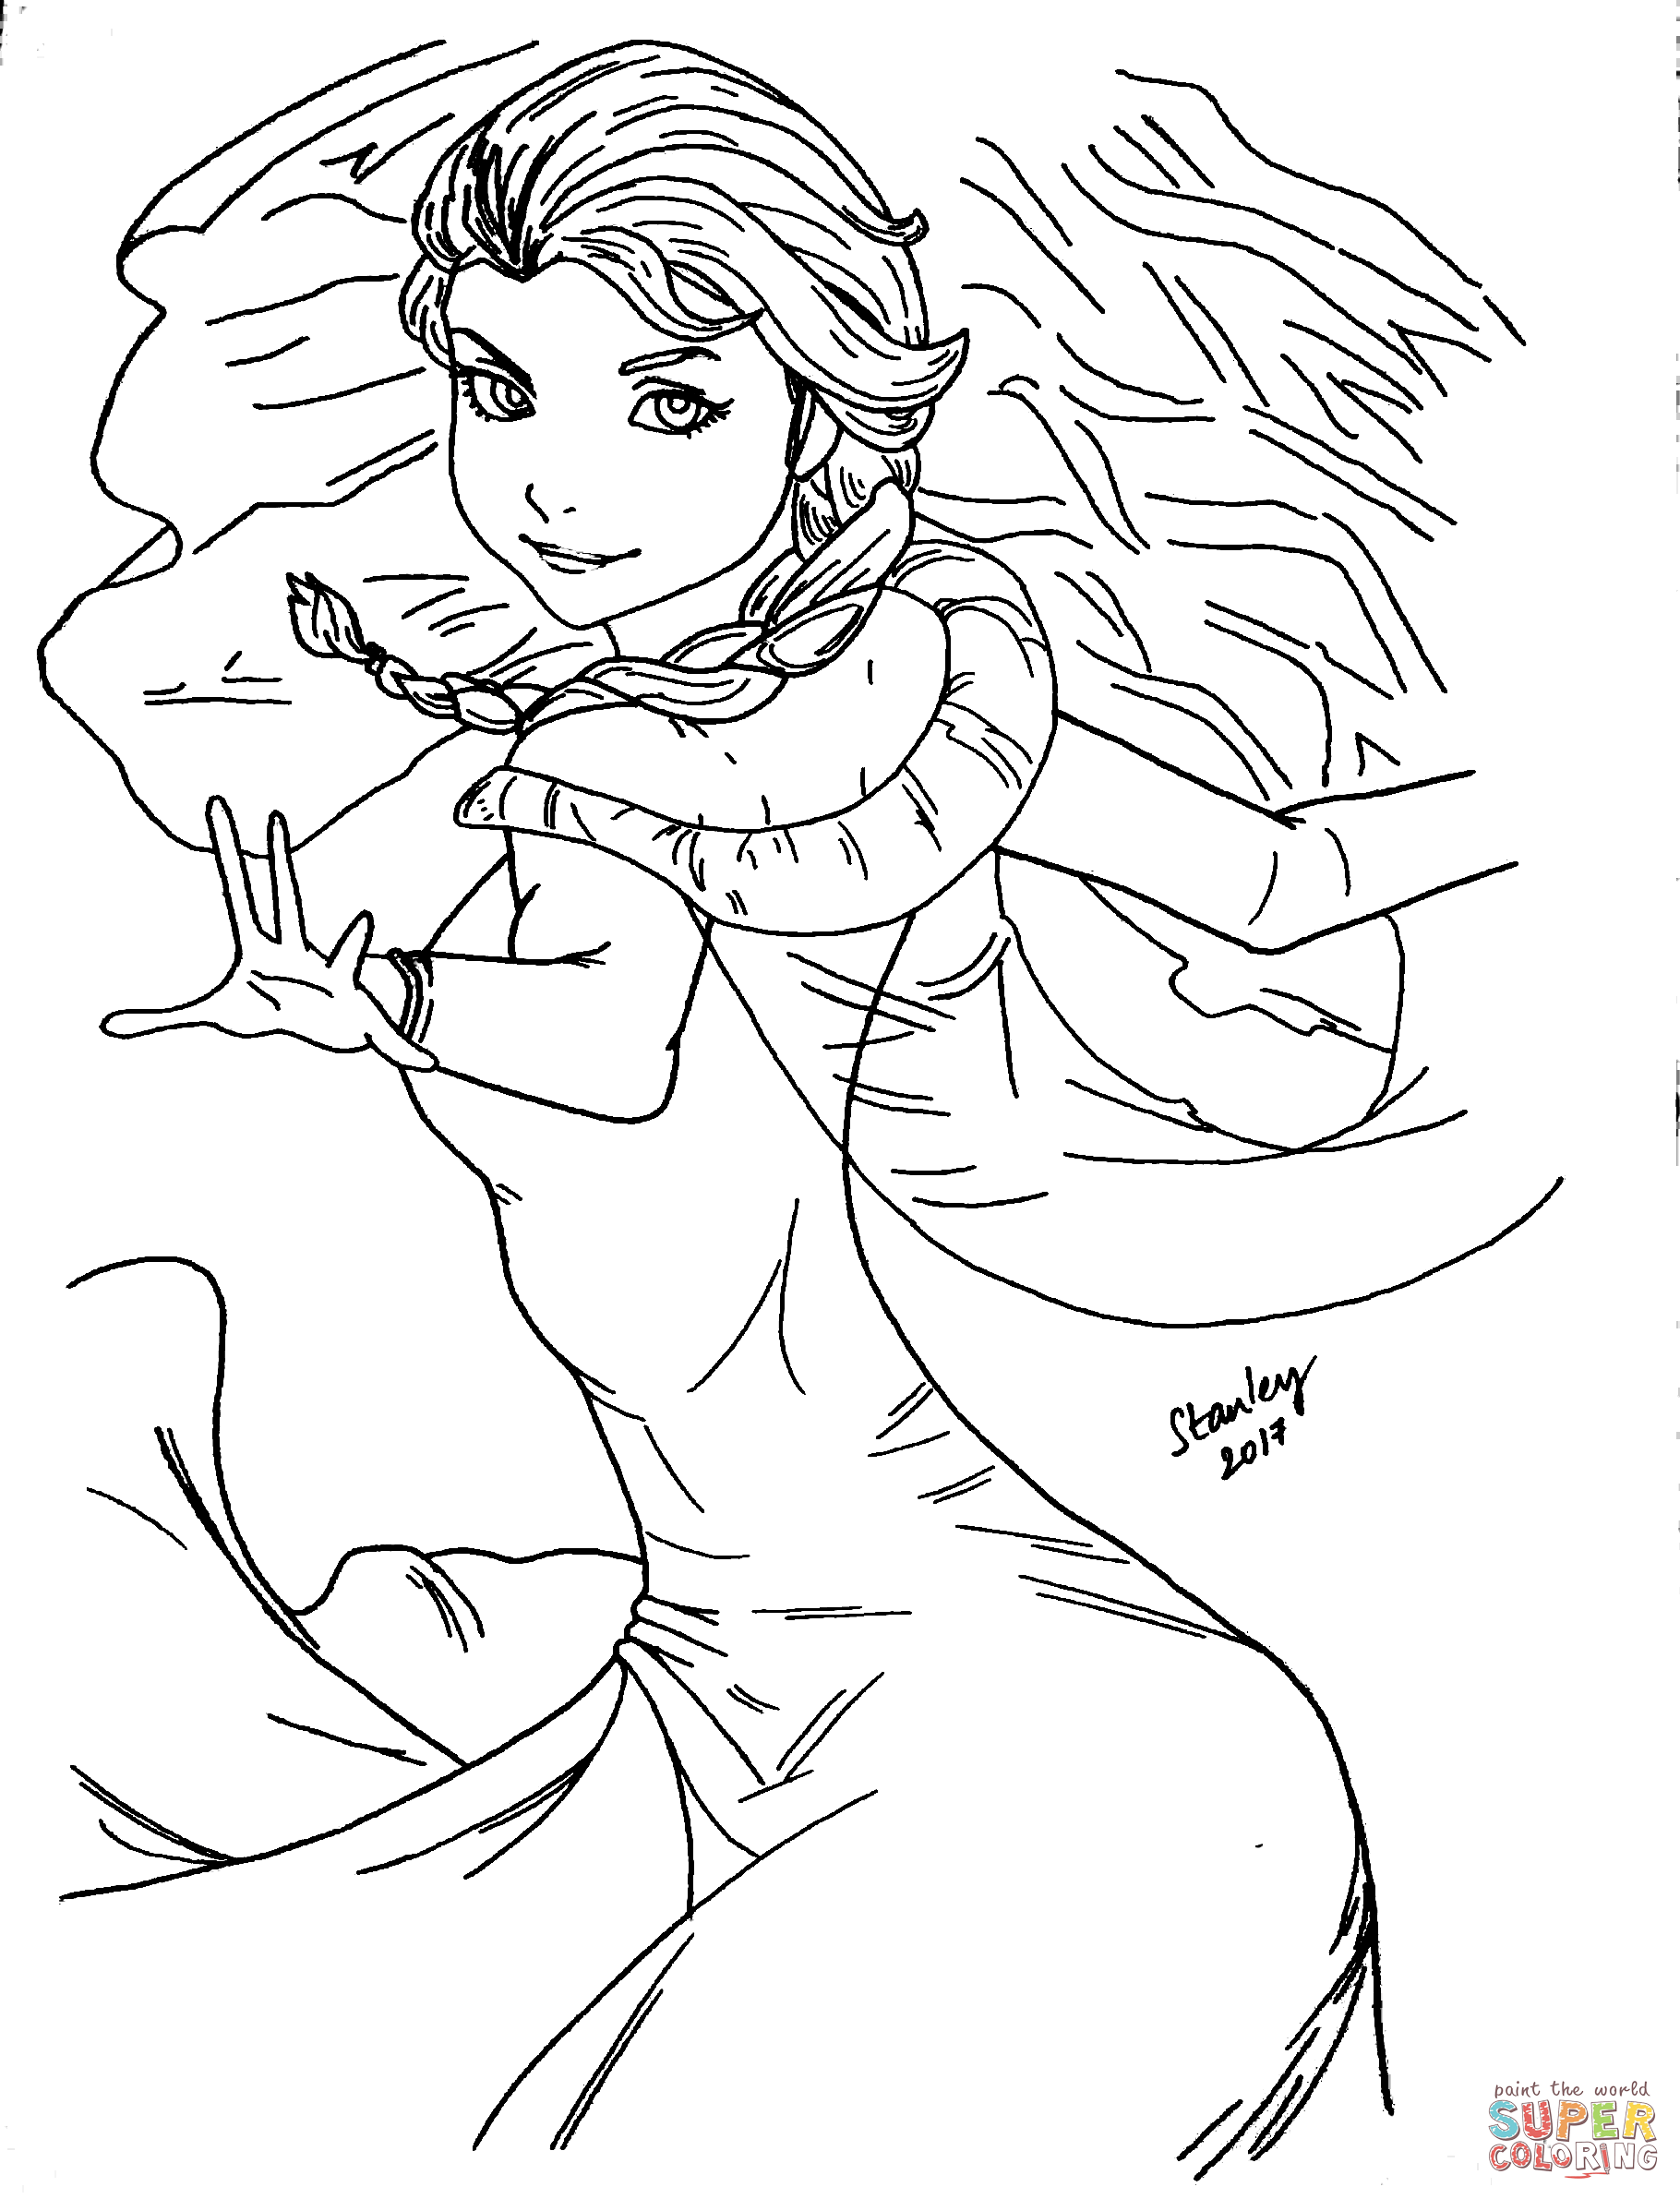 Elsa coloring page free printable coloring pages